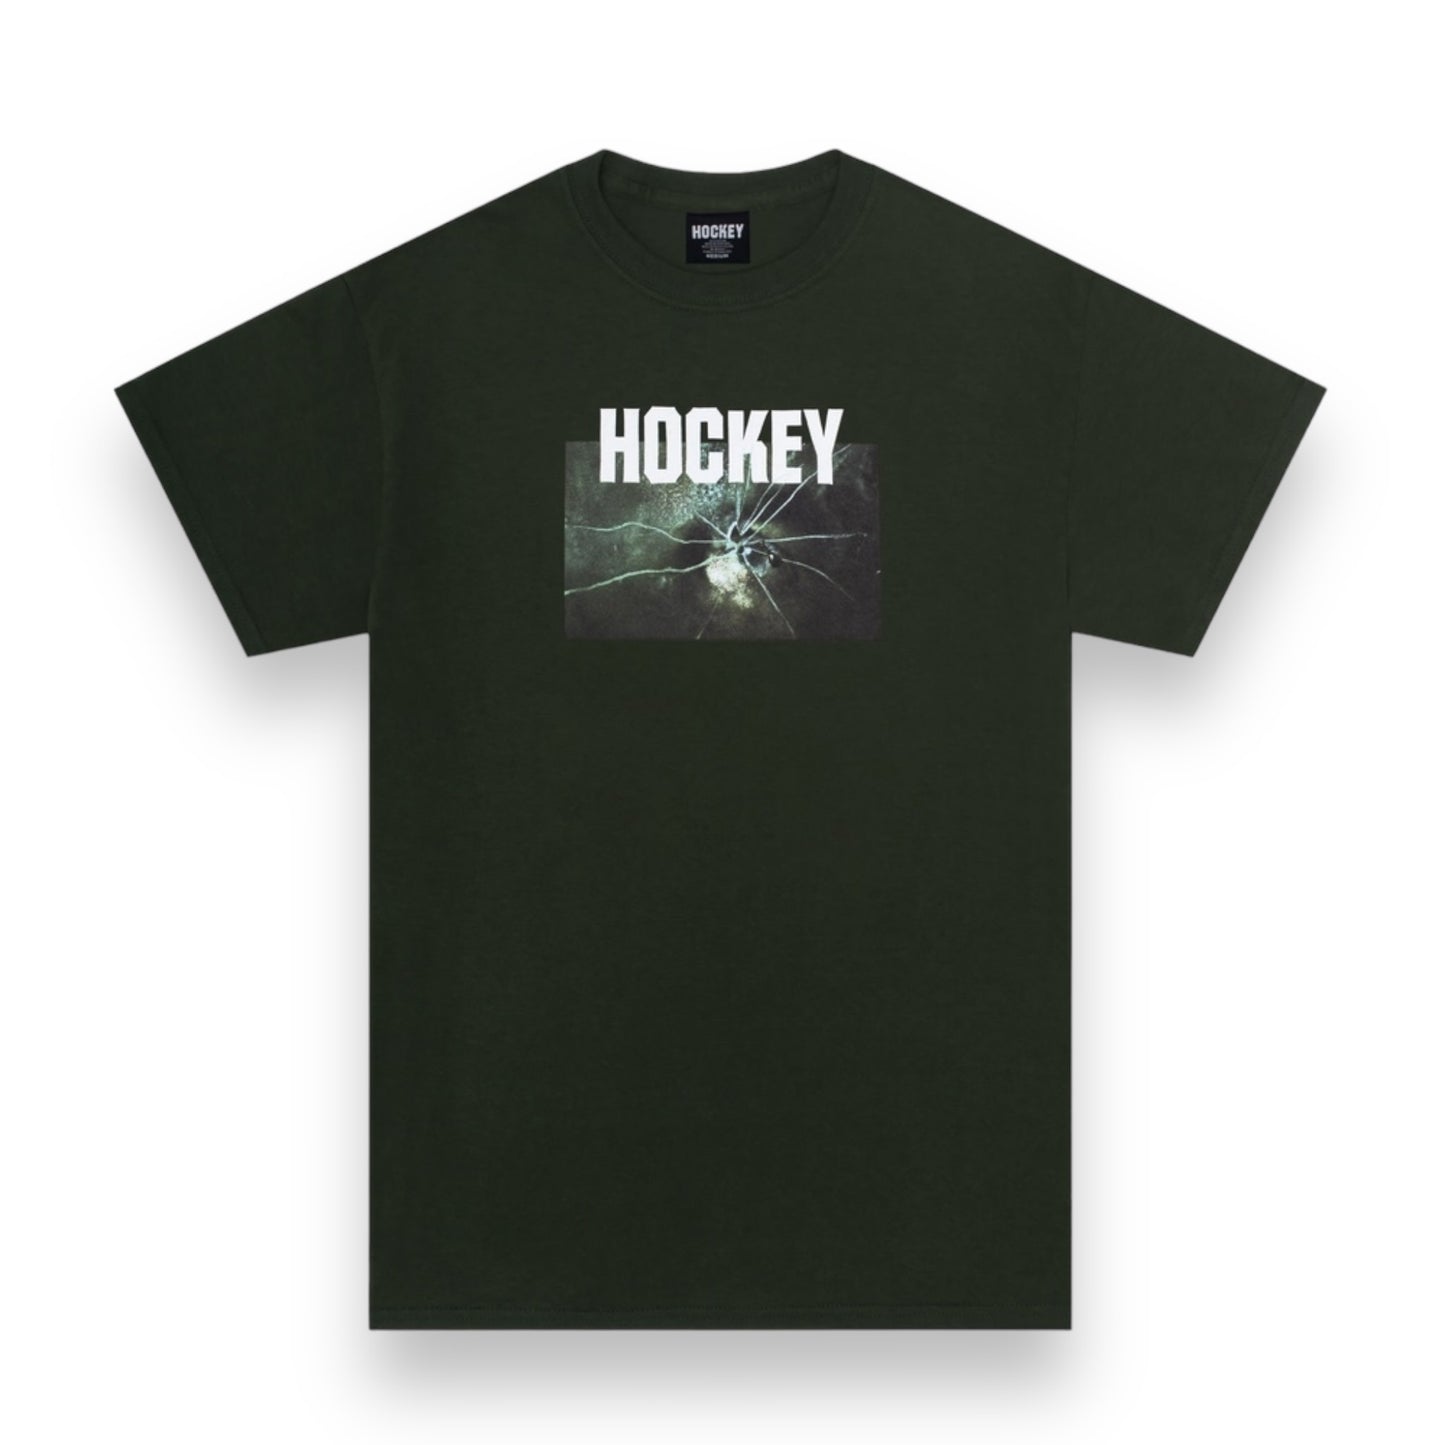 Thin Ice s/s Tee Shirt Blk(size options listed)